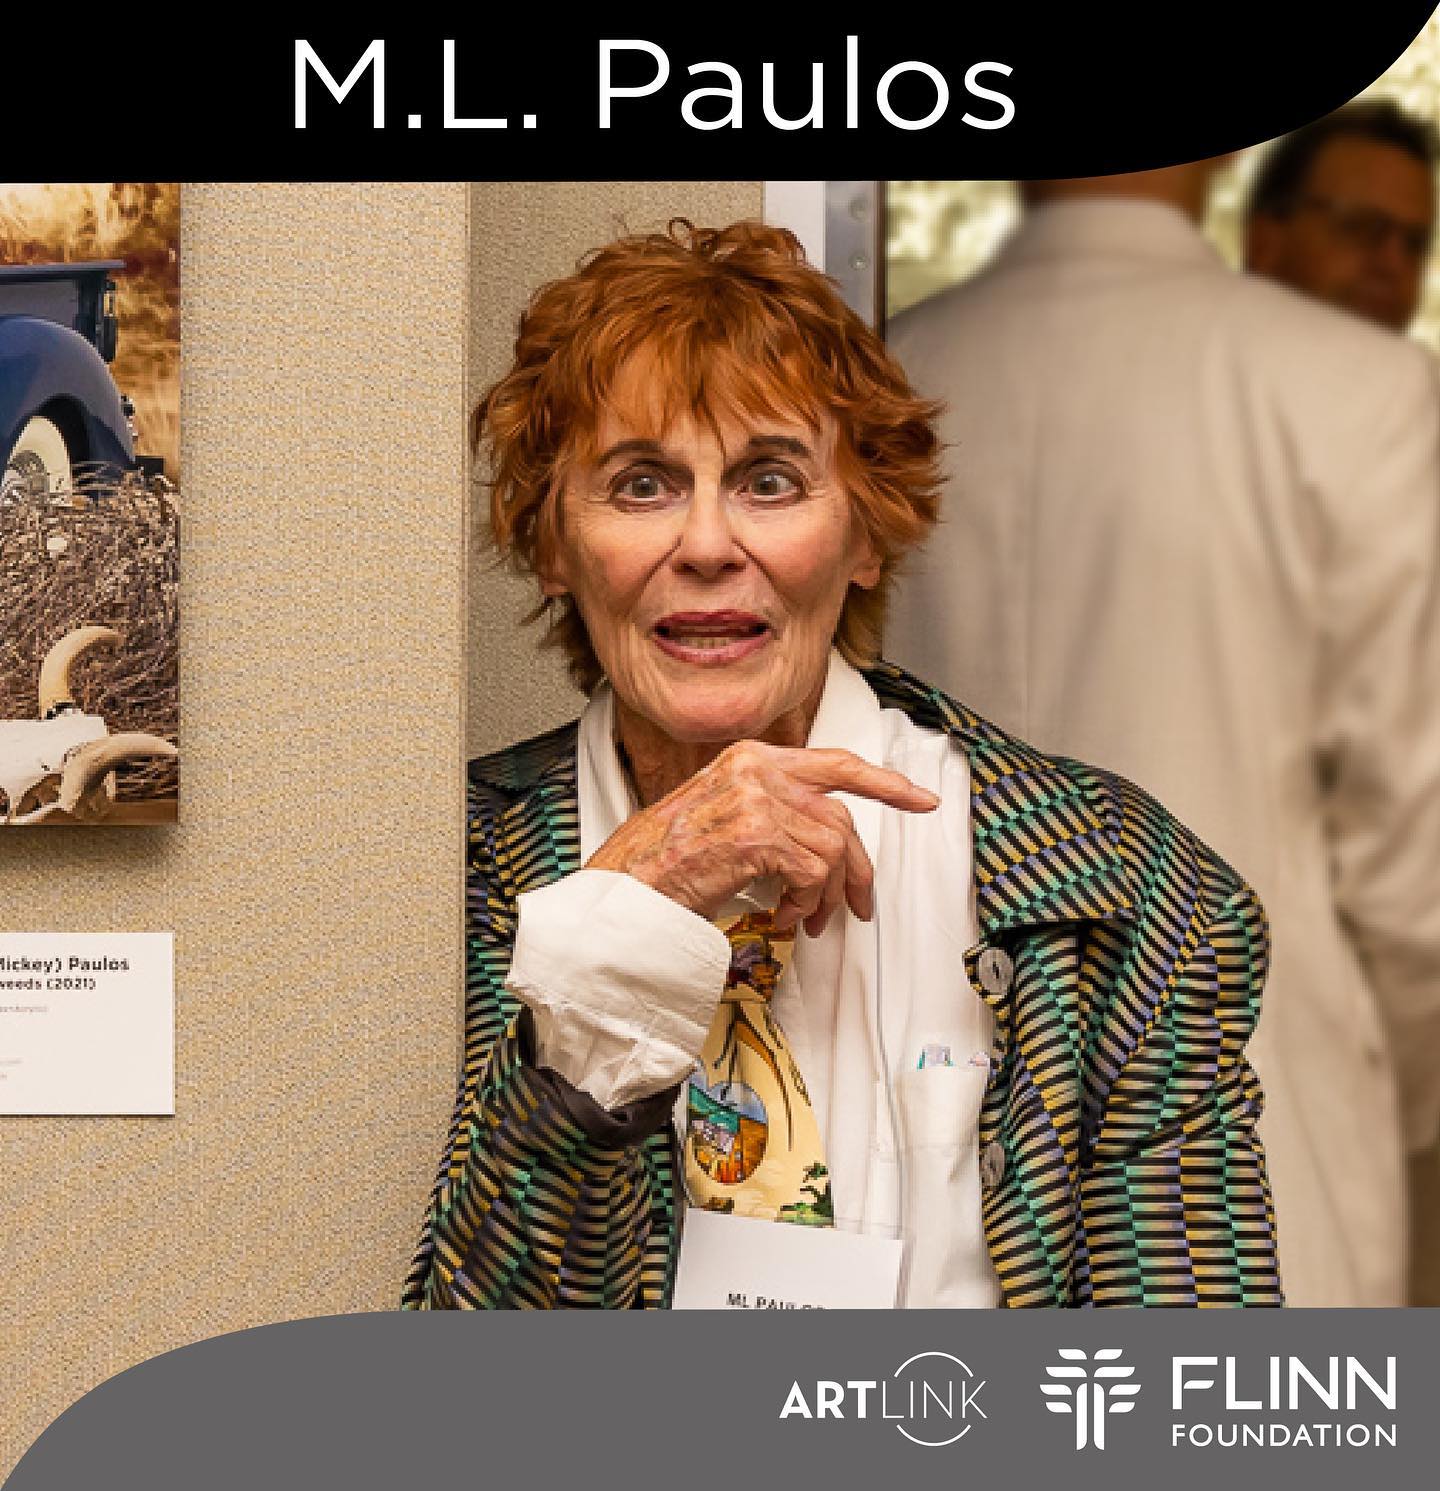 Congratulations to M.L. (Mickey) Paulos one of the selected artists for the inaugural exhibition of the Flinn Foundation Art Program! The program is a complement to the Foundation's grantmaking focus and demonstrates the importance of the arts. 

“You can’t go back and change the beginning but you can start where you are and change the ending.” -M.L.

We thank the Flinn Foundation for this collaborative partnership and their continued support of Arizona’s arts and culture community.

To learn more about this program please visit us: https://artlinkphx.org/flinn/